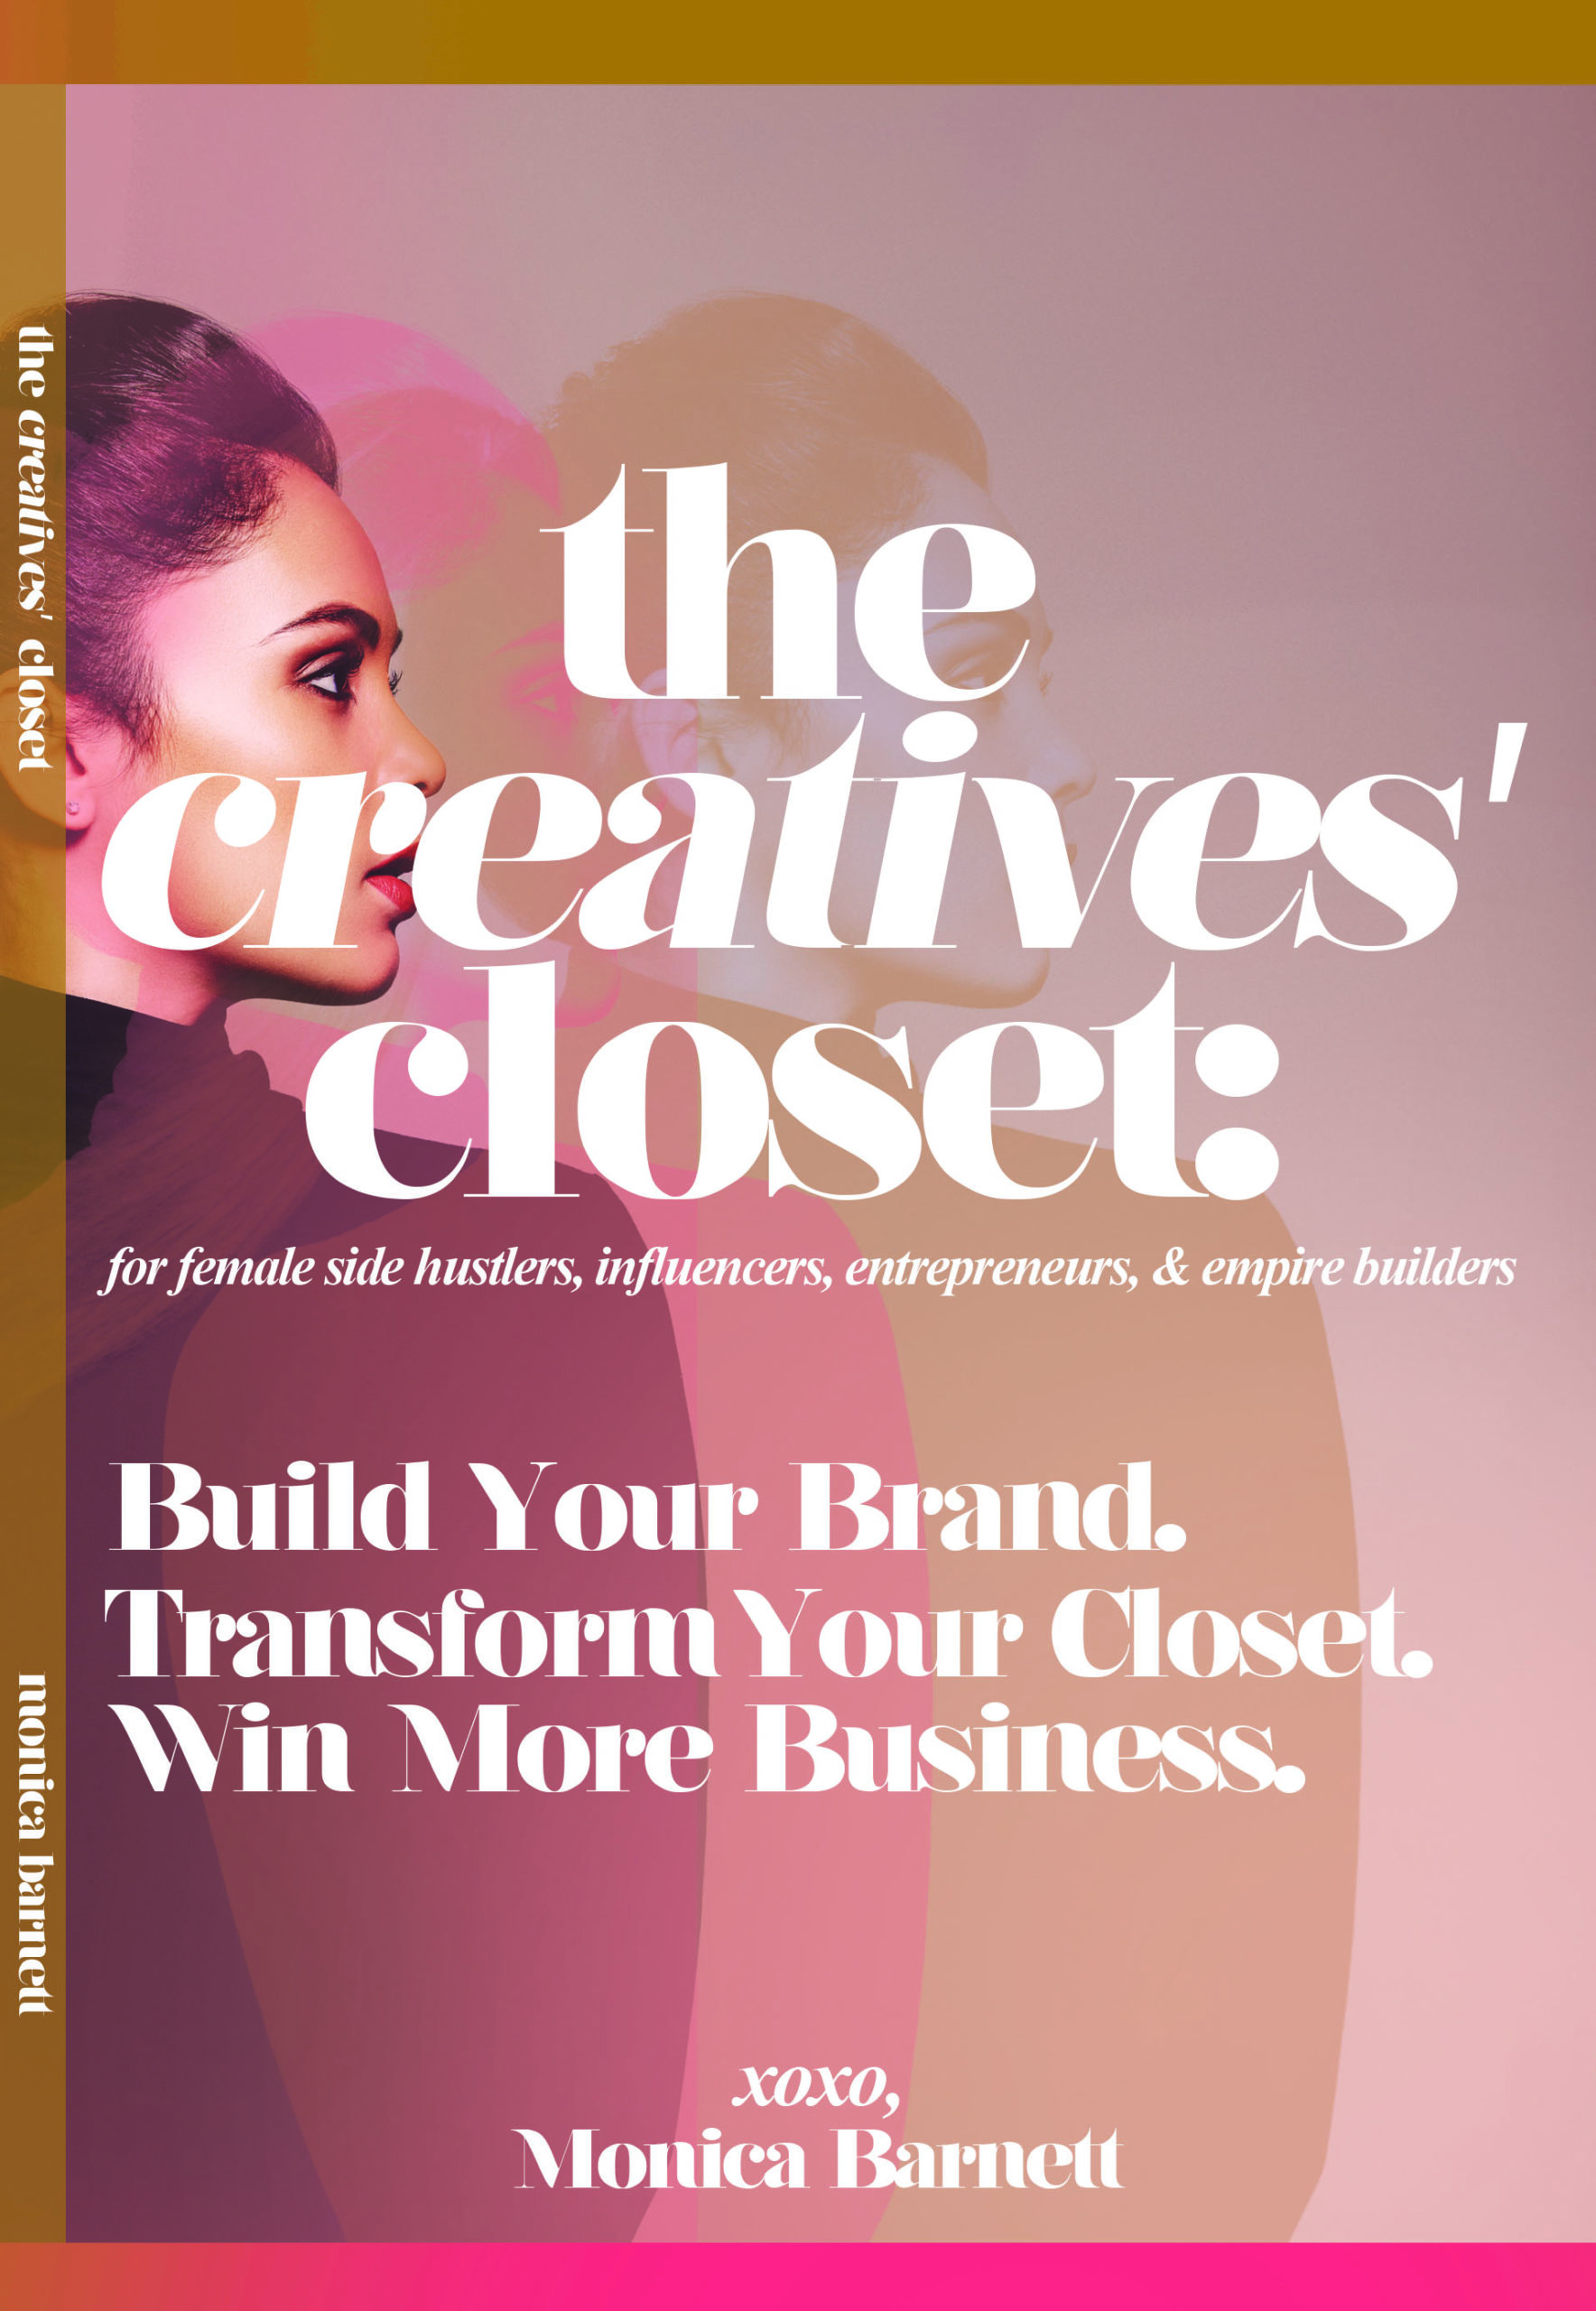 The Creatives' Closet a style guidebook that show you how to dress better and build your brand and closet